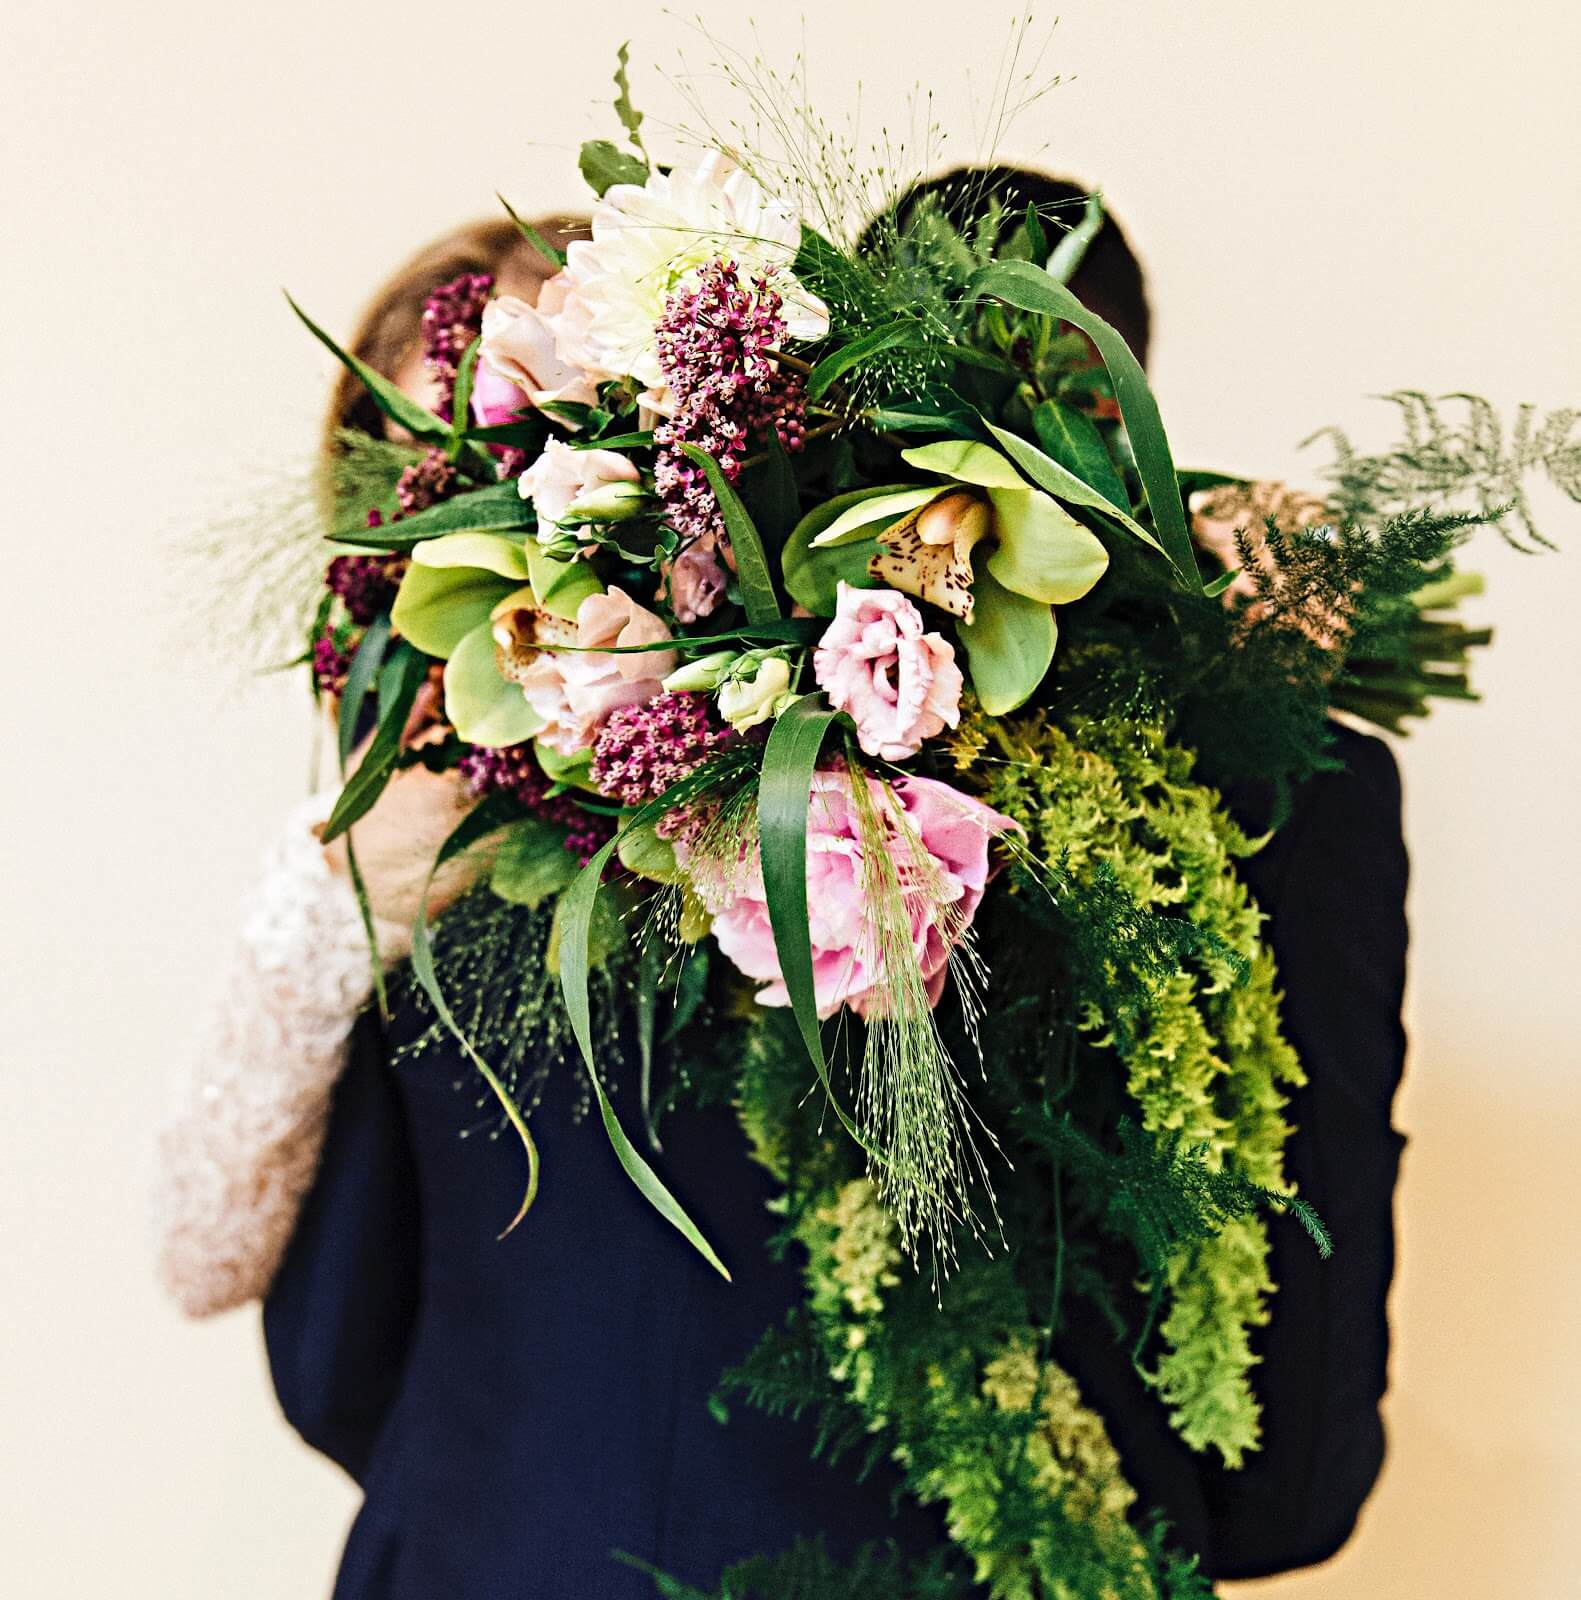 Cascading greens with pops of light and dark Purple flowers